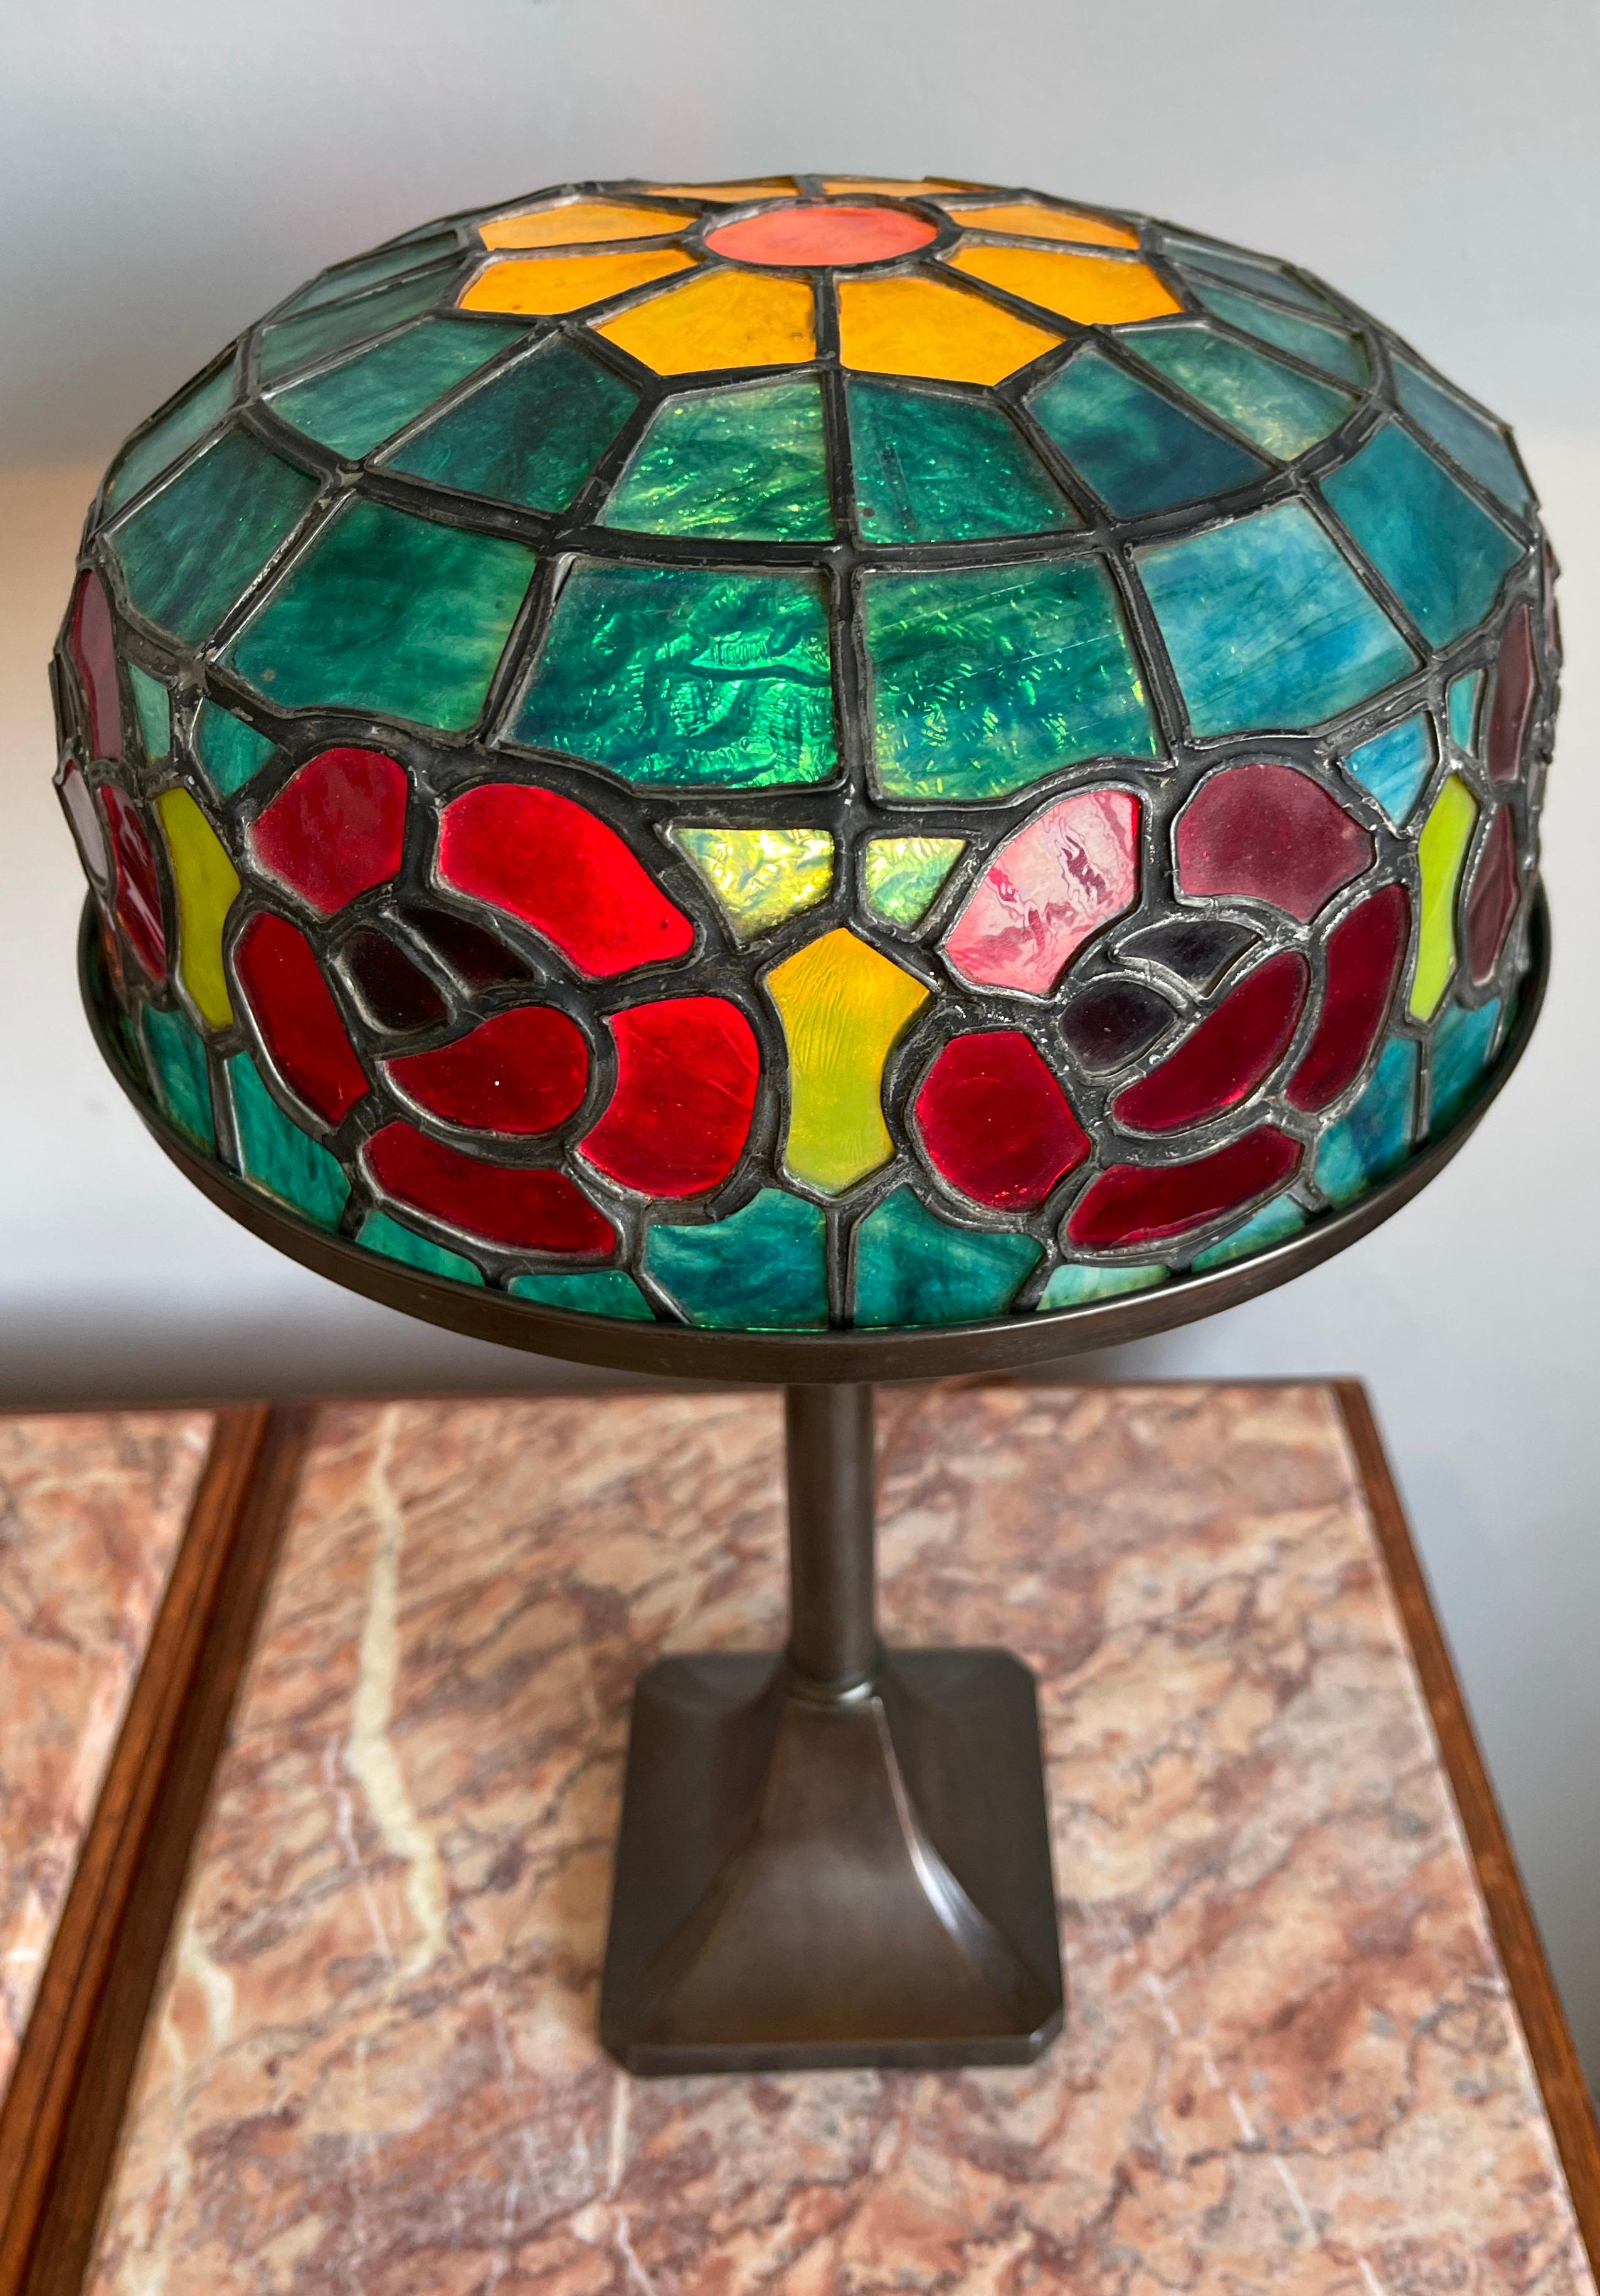 Wonderful Stain Leaded Art Deco Glass Table Lamp Geometric Design & Great Colors 1